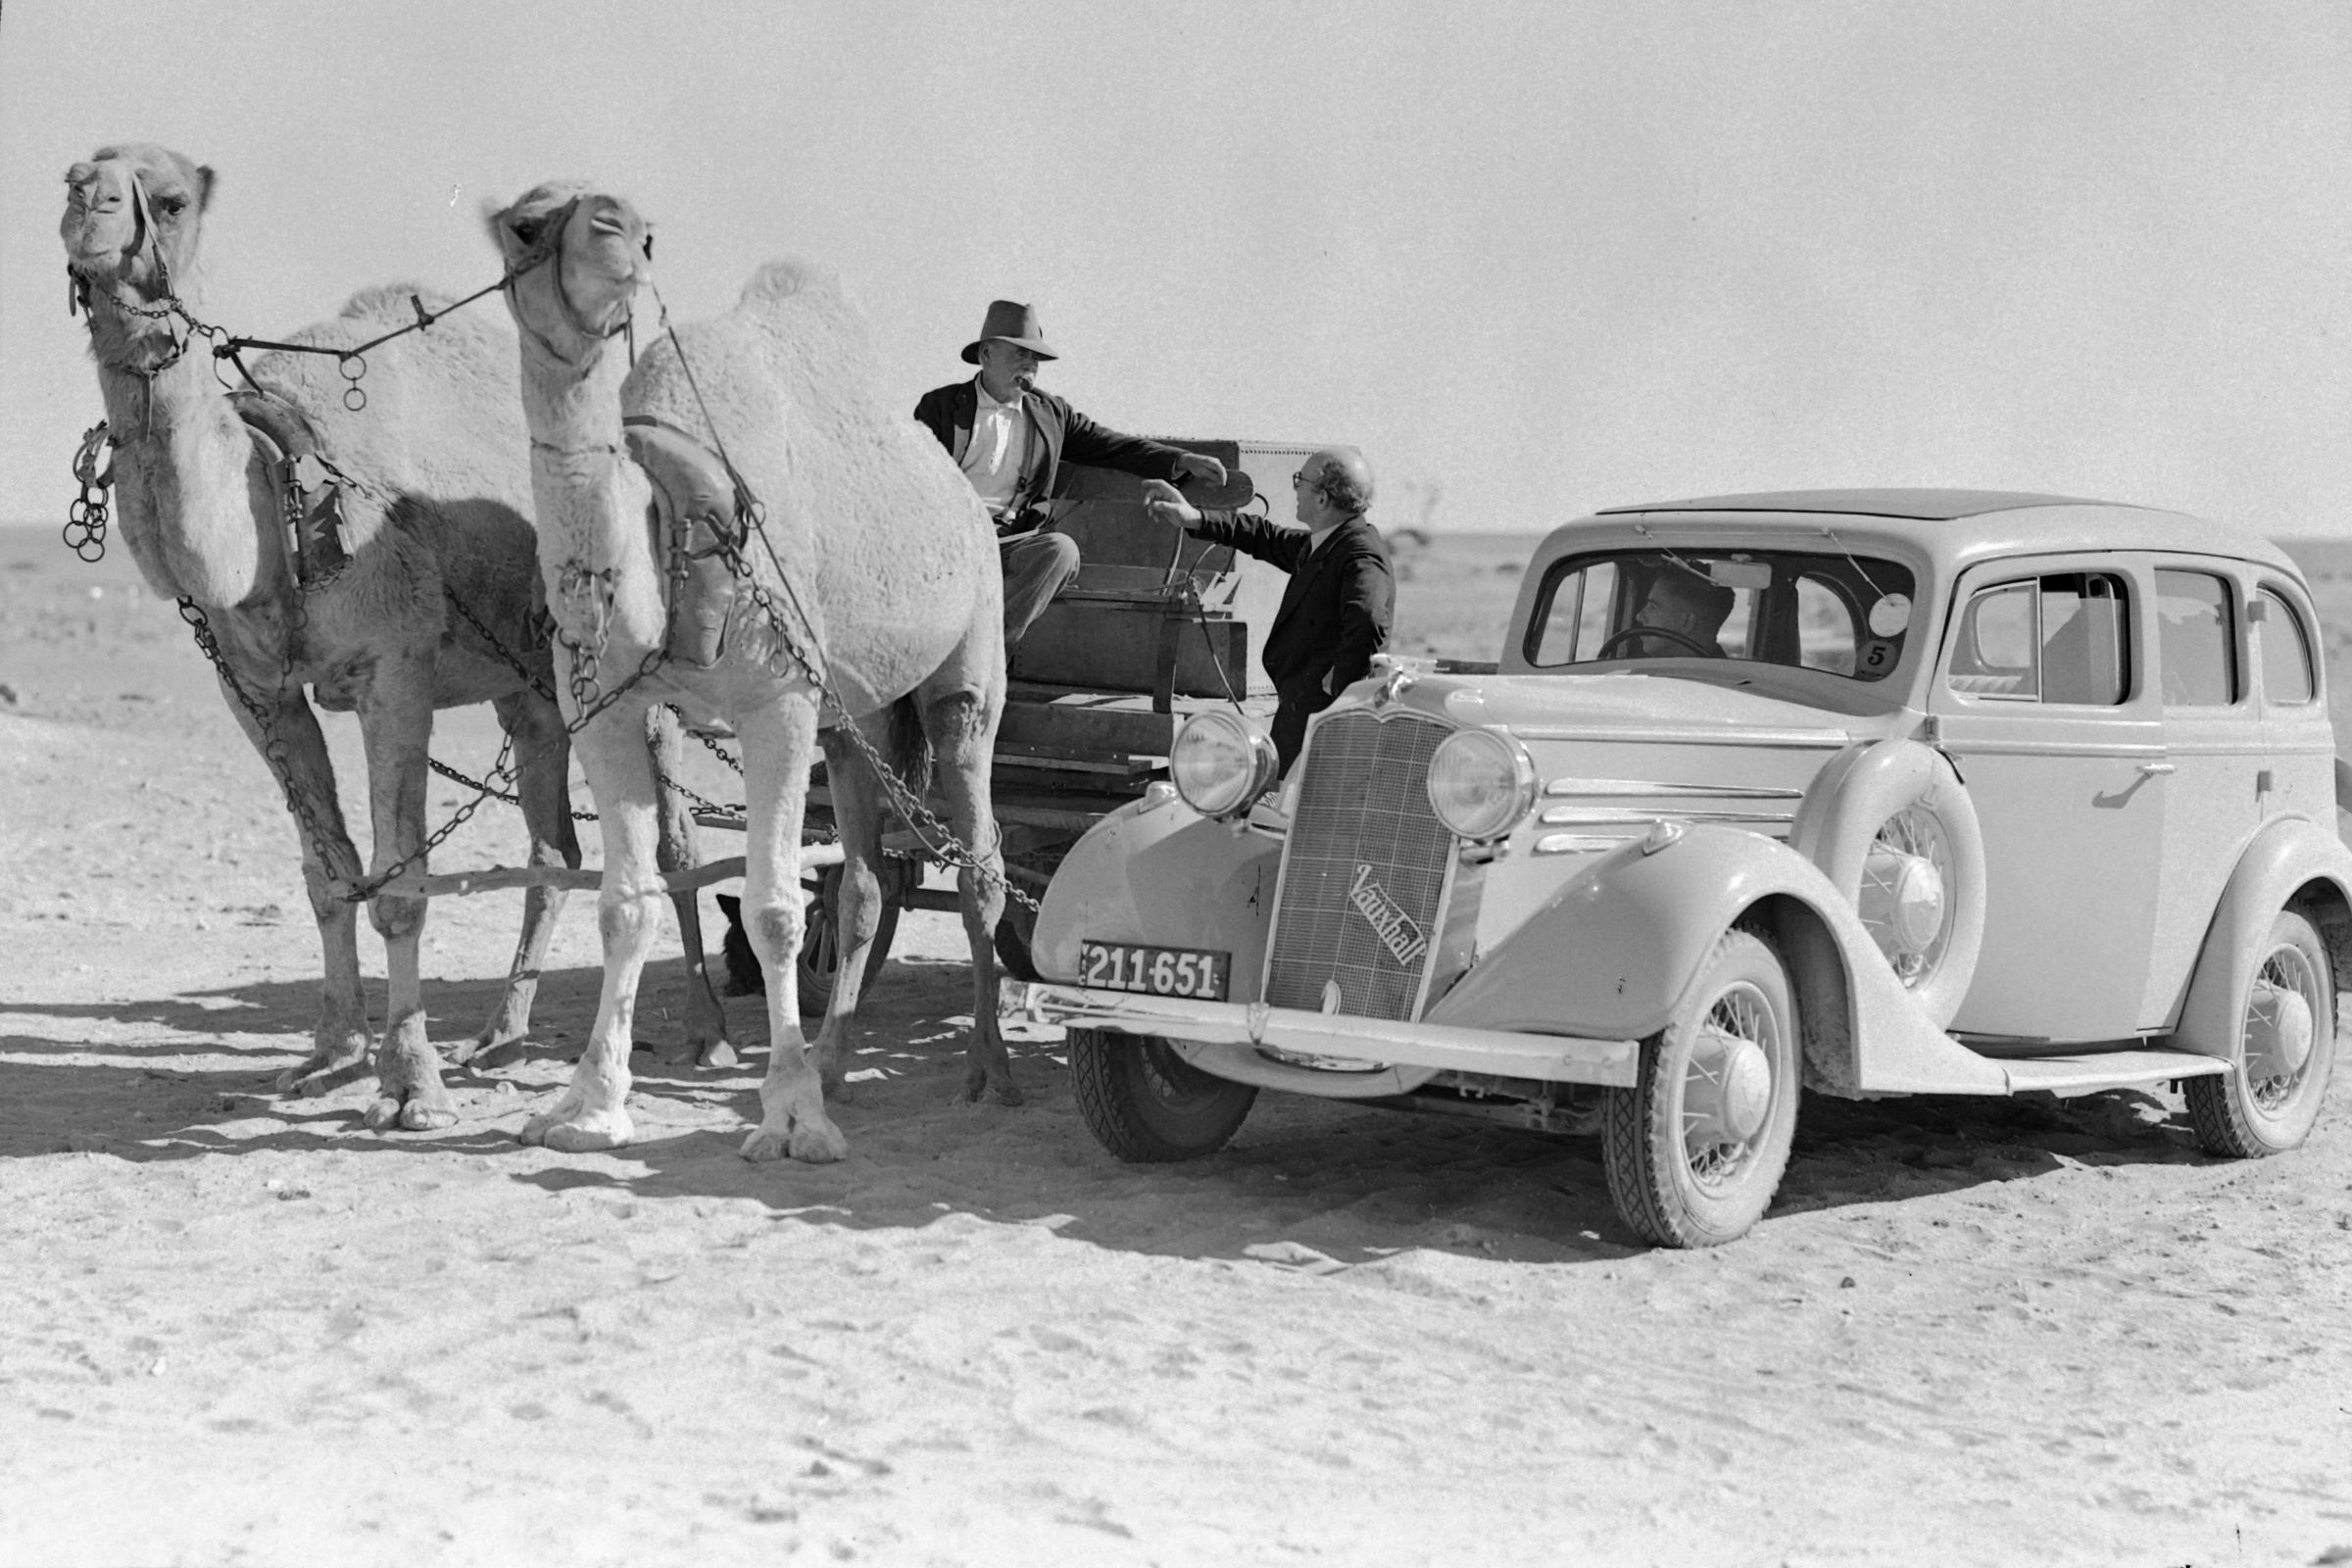 Hurley Image of Camel and Car 